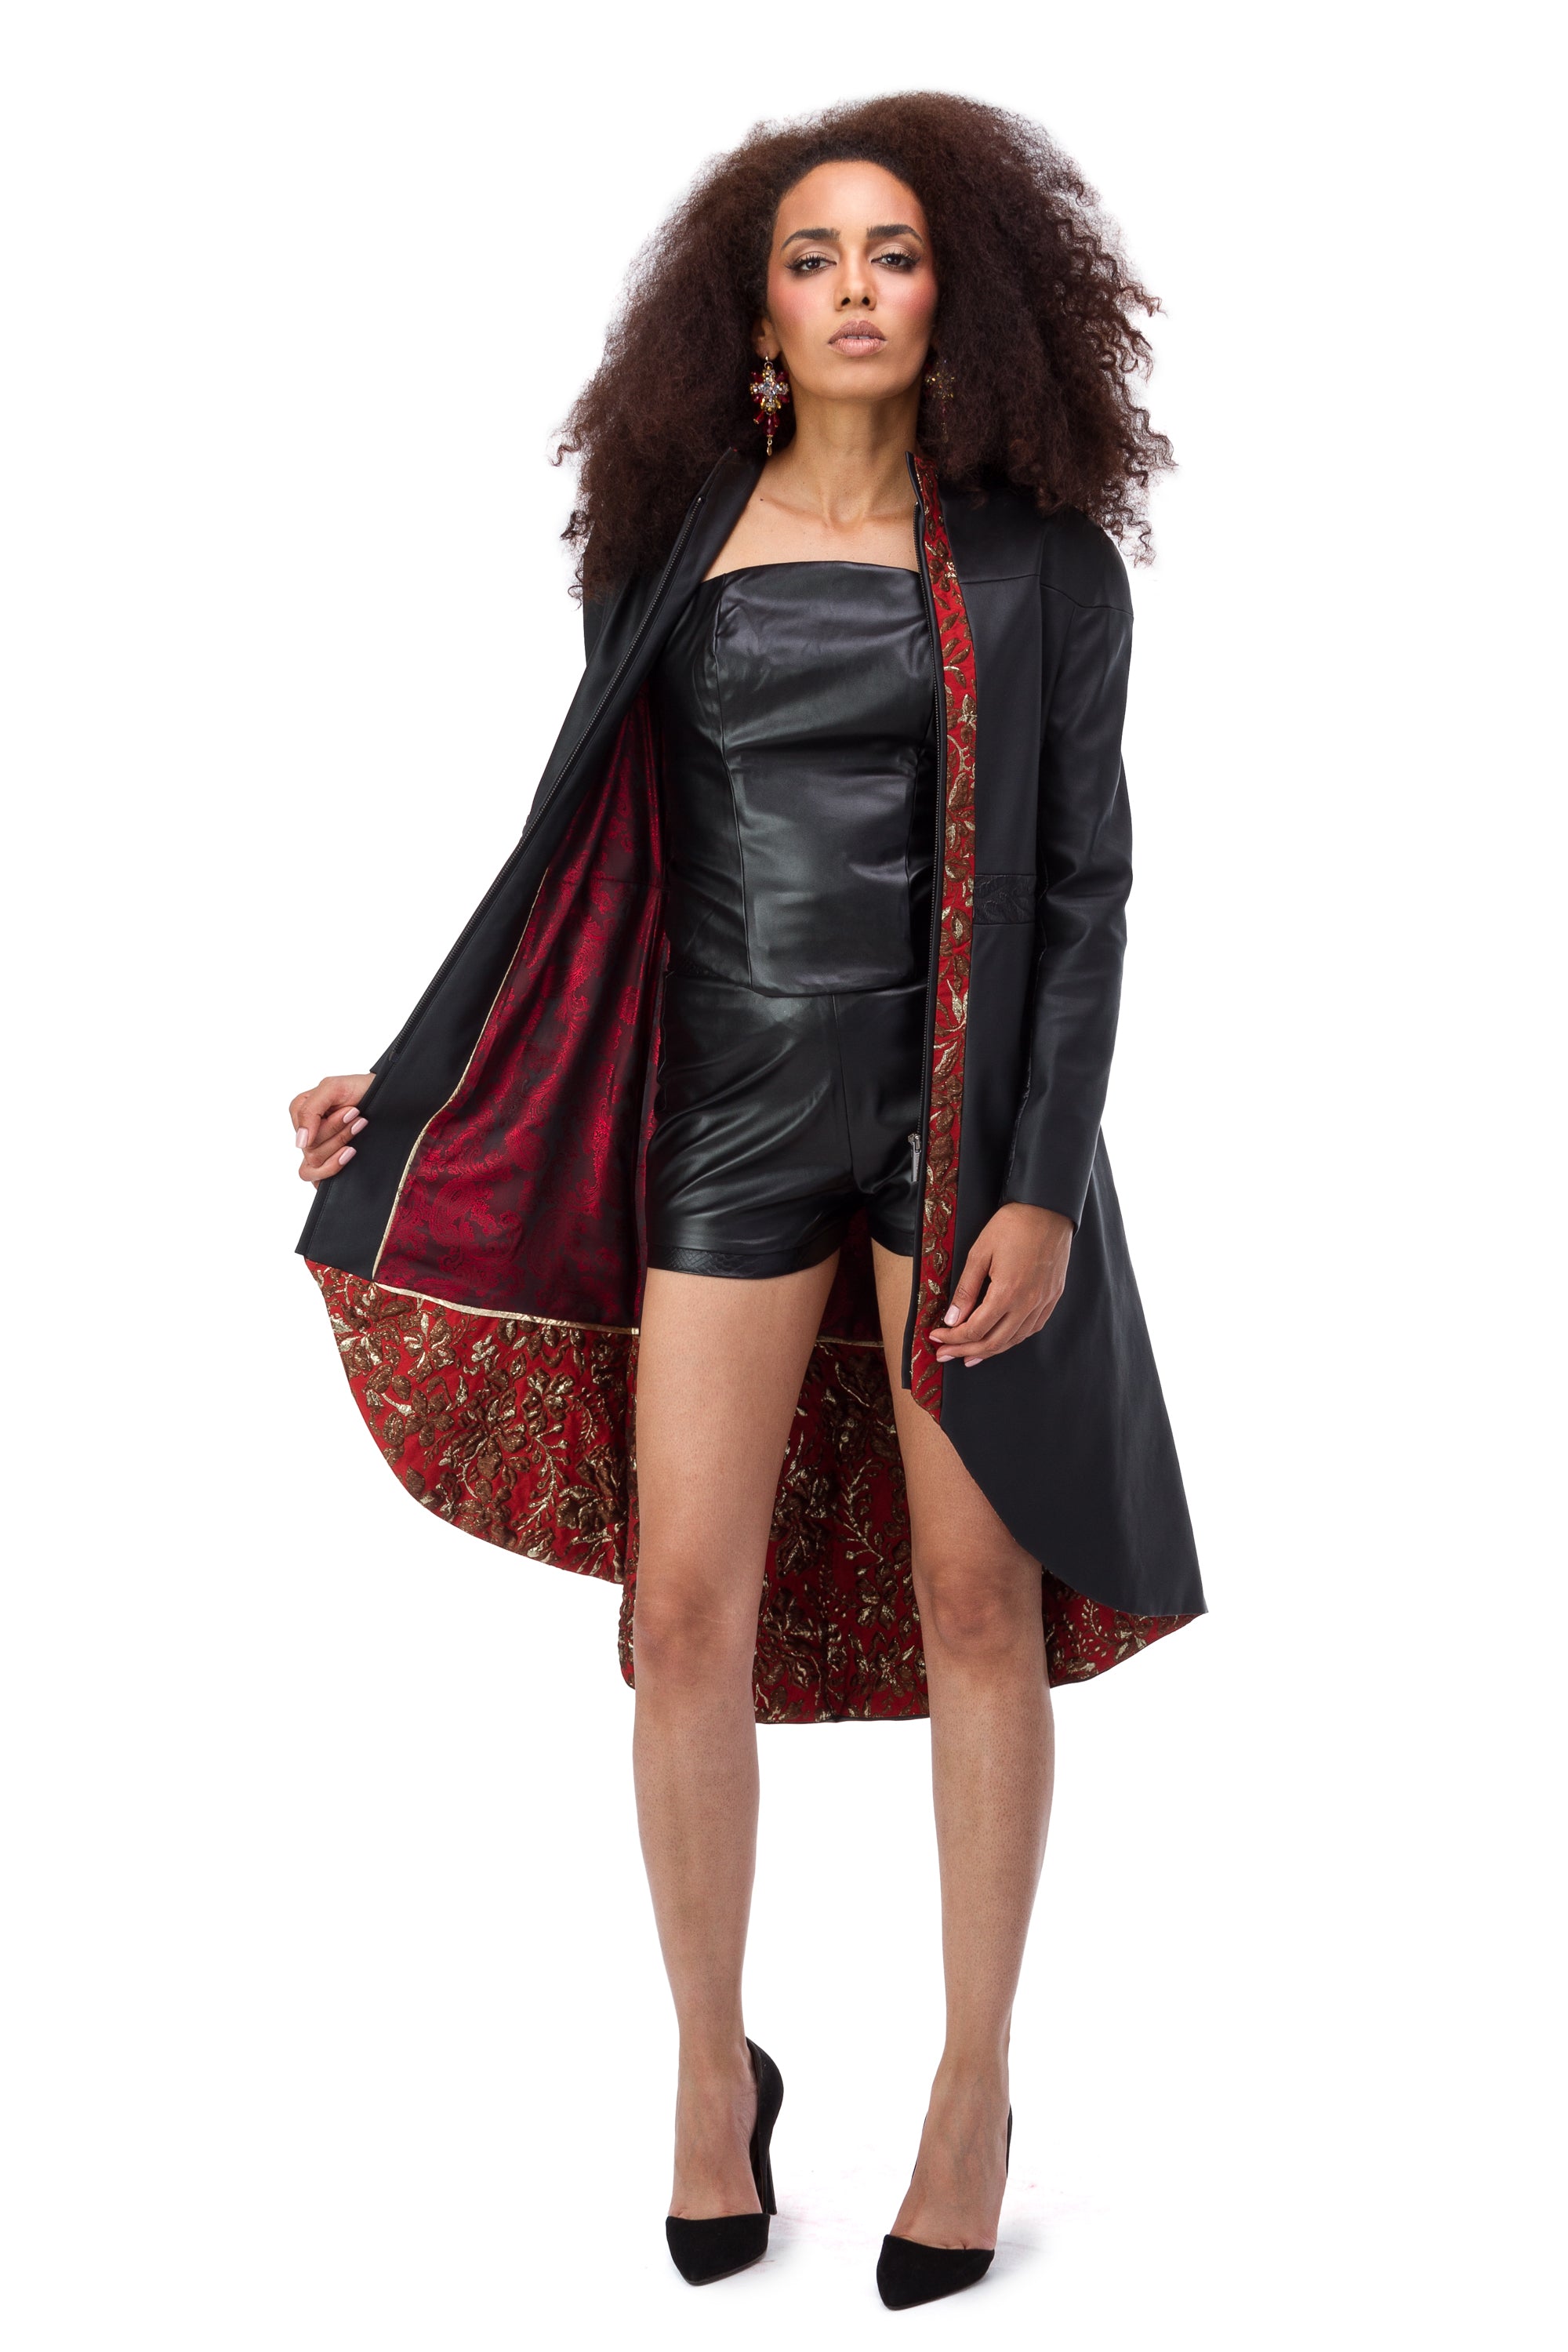 Black eco-leather coat with red jacquard elements